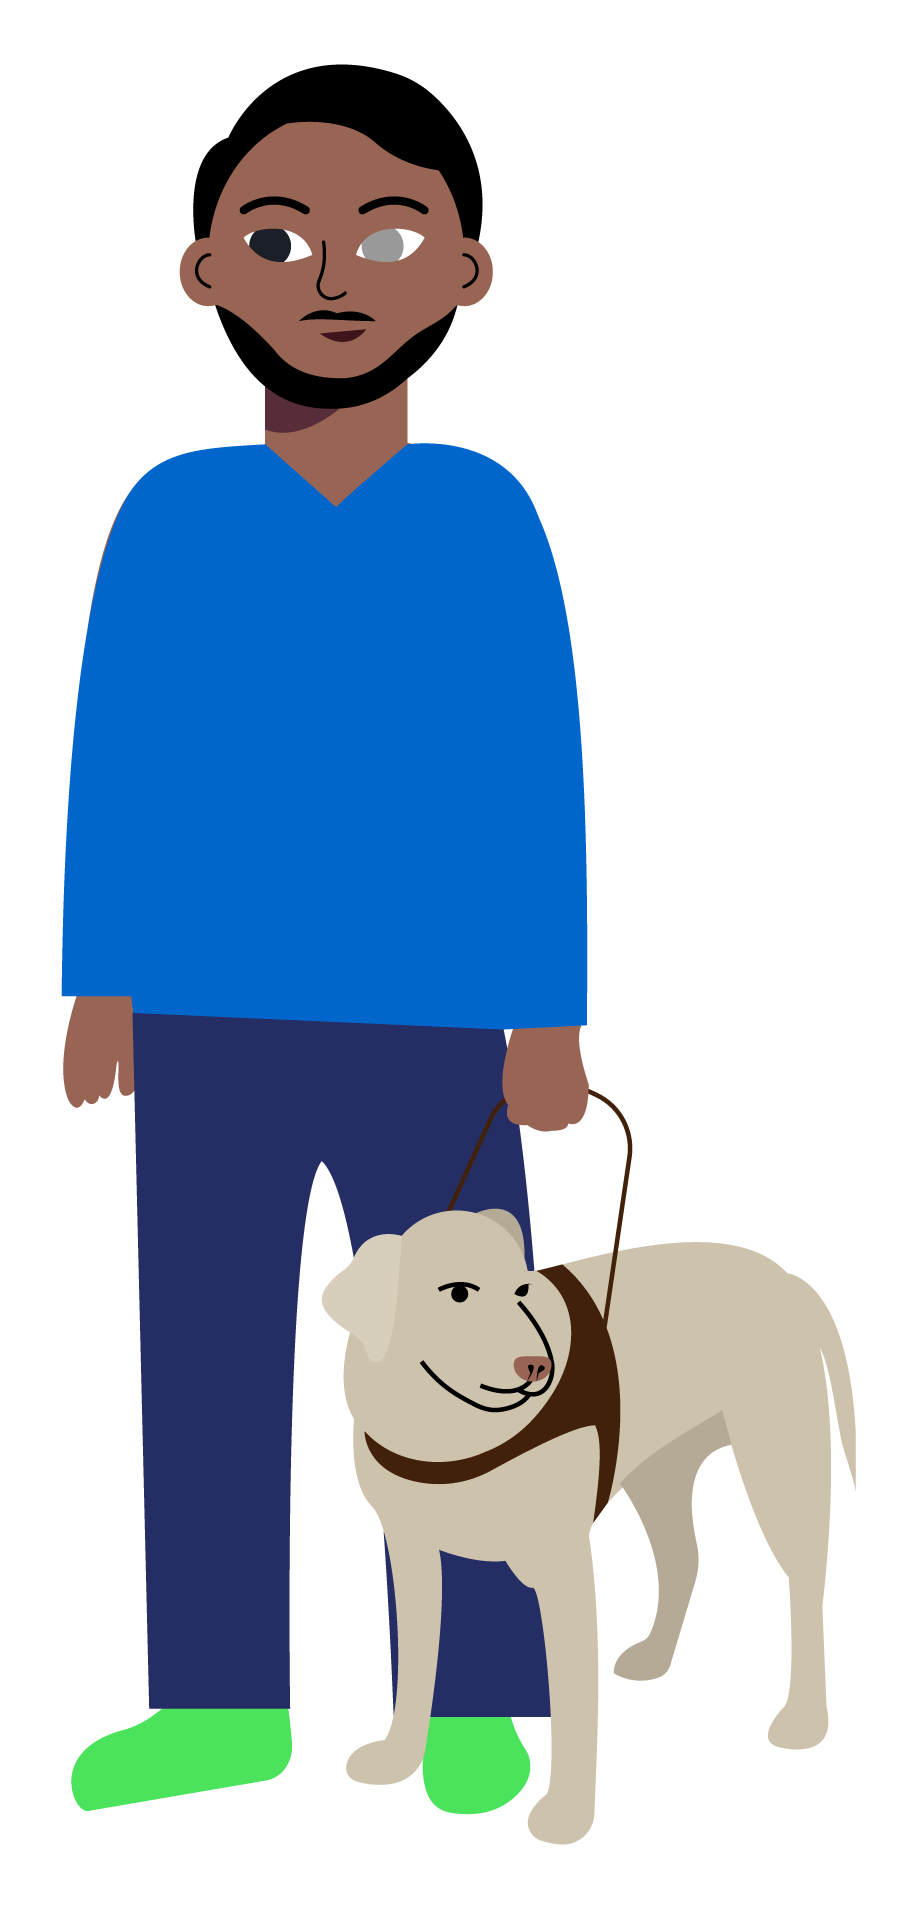 Simple illustration of Amir, a South Asian man with low vision. He has a service dog.